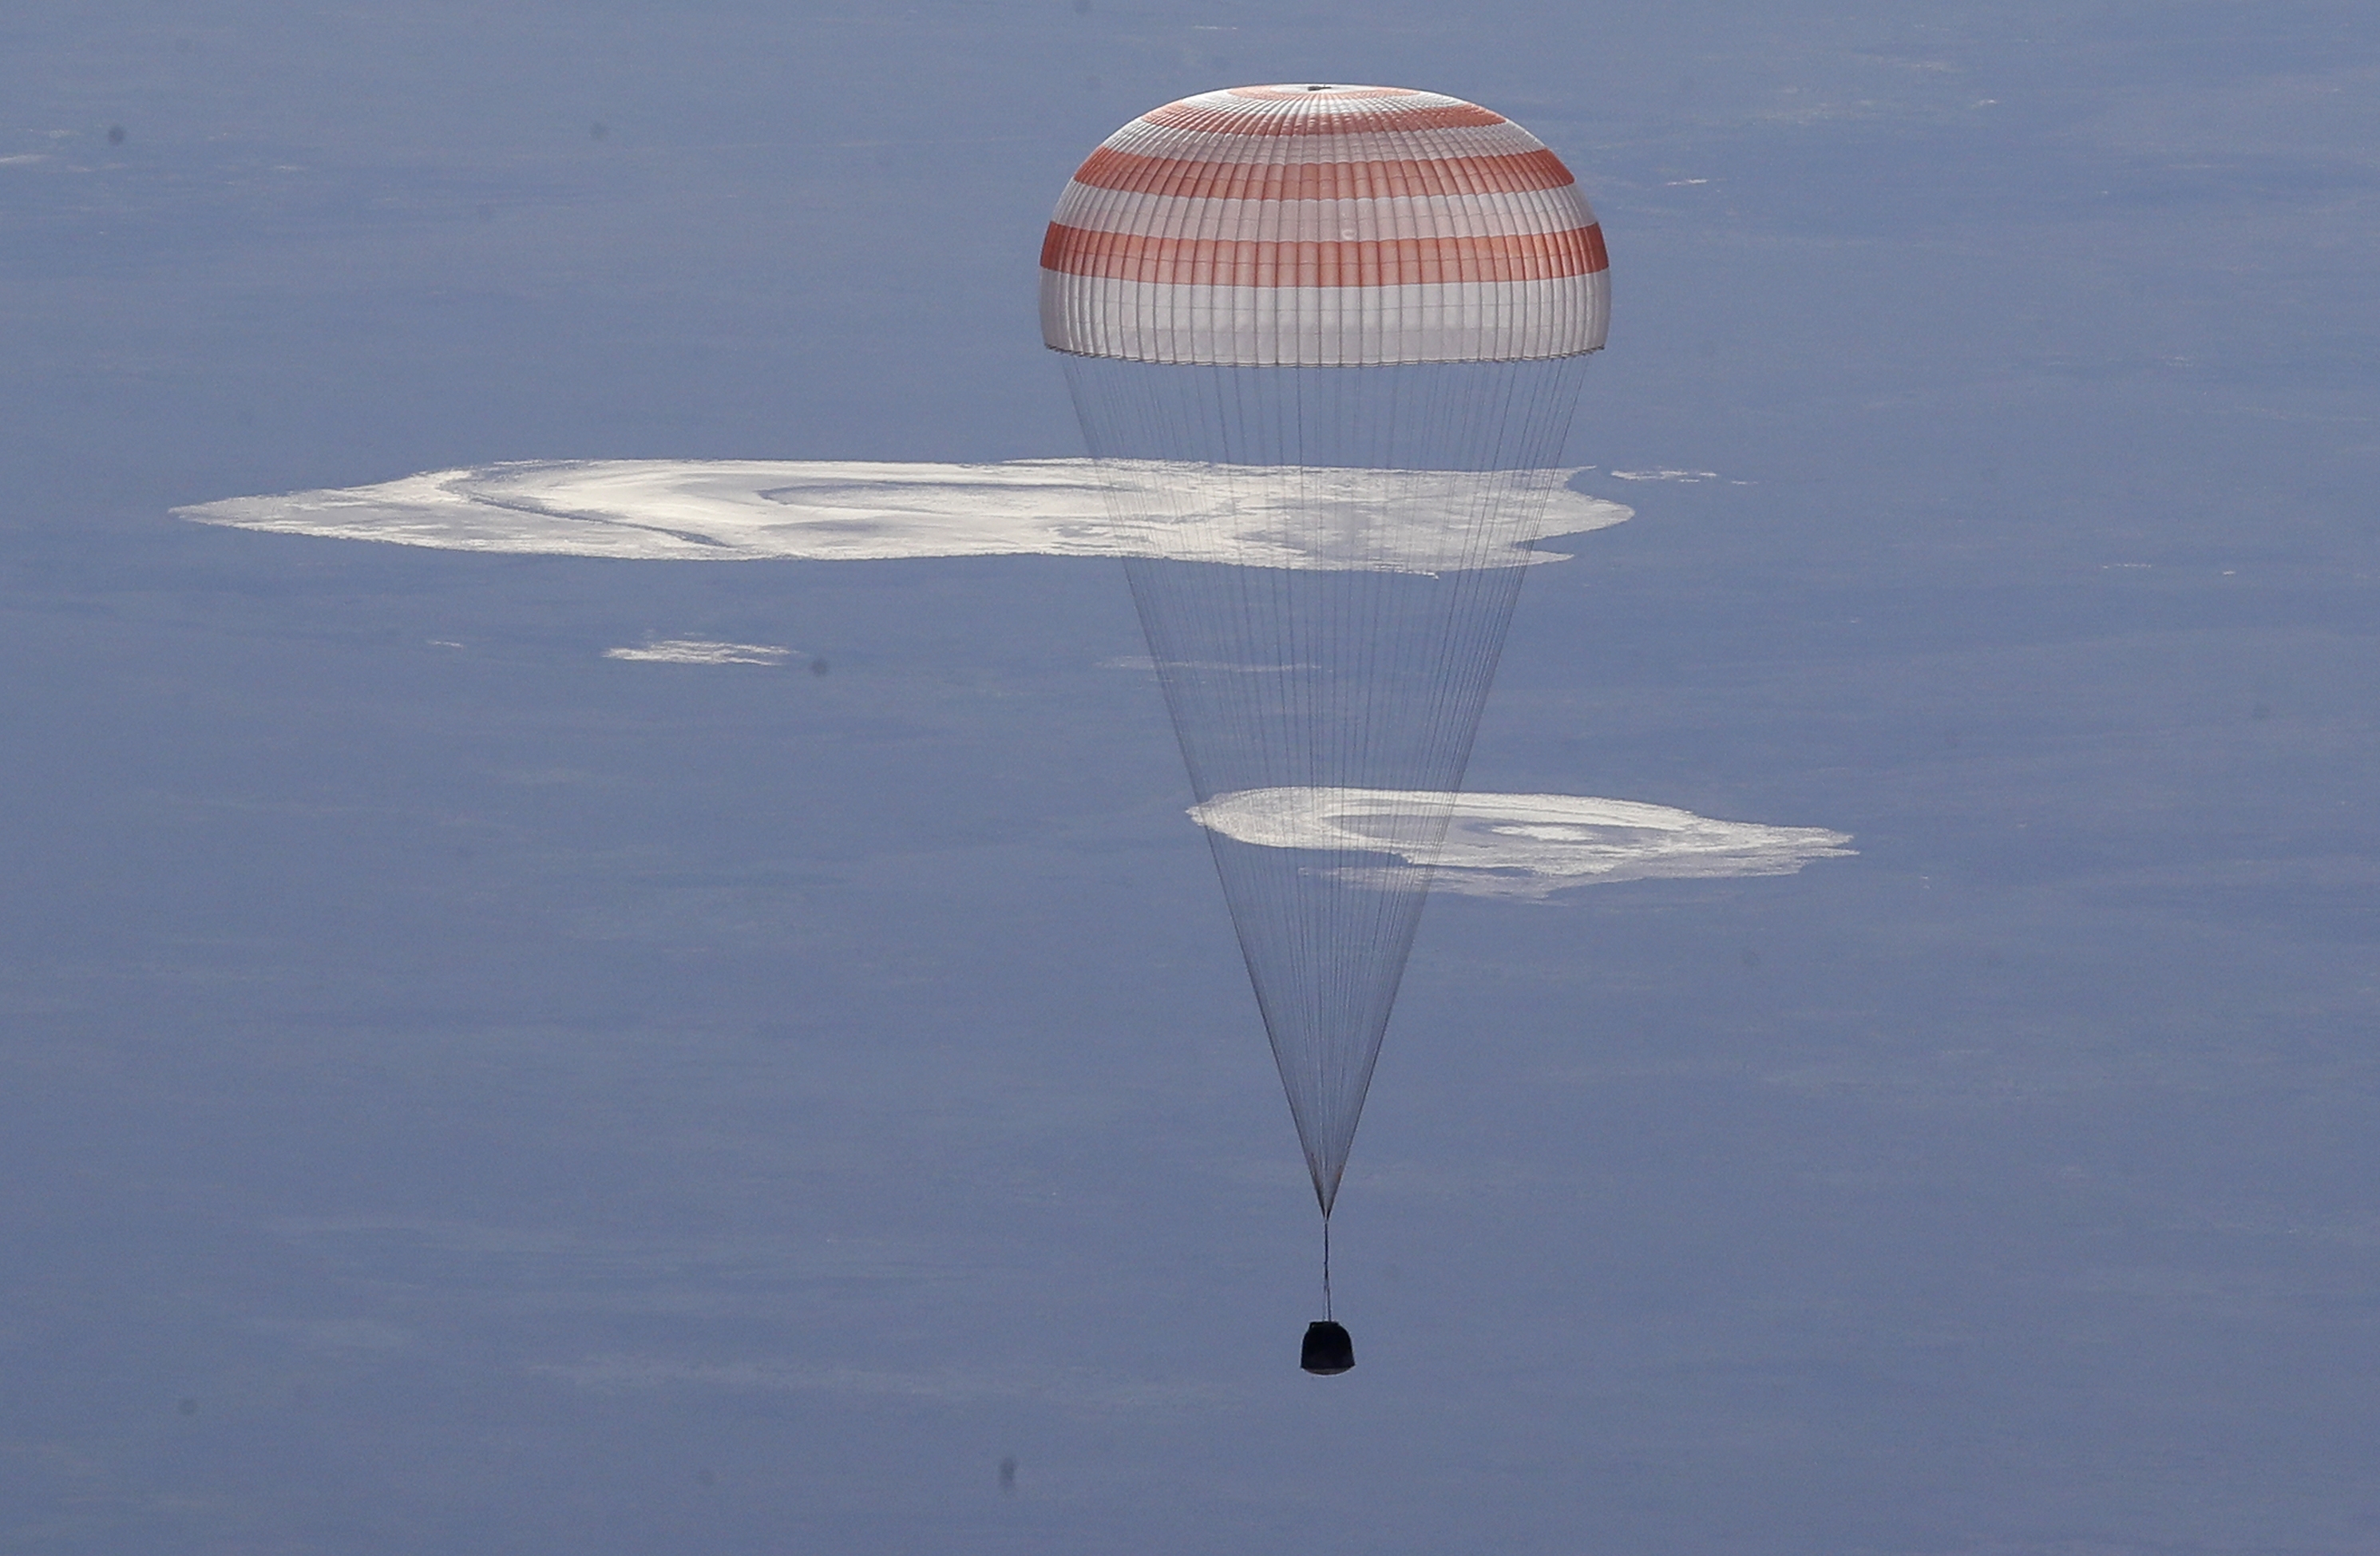 A Russian Soyuz MS-07 space capsule descends about 150 km (90 miles) south-east of the Kazakh town of Zhezkazgan,  Kazakhstan, Sunday, June 3, 2018. A Soyuz space capsule with Russian cosmonaut Anton Shkaplerov,  U.S. astronaut Scott Tingle and Japanese astronaut Norishige Kanai, returning from a mission to the International Space Station landed safely on Sunday on the steppes of Kazakhstan. (AP Photo/Dmitri Lovetsky, pool)